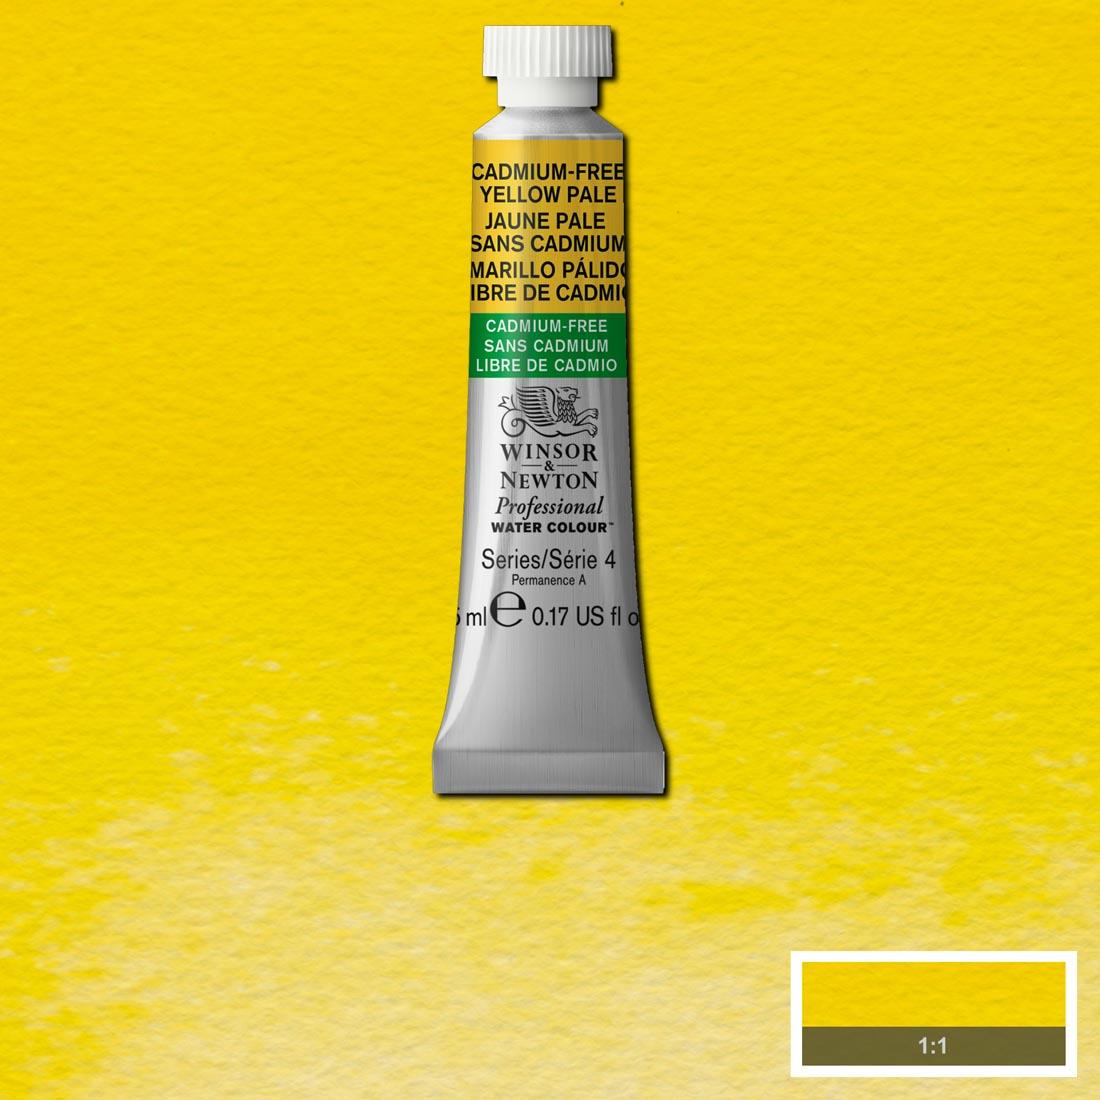 Tube of Cadmium-Free Yellow Pale Winsor & Newton Professional Water Colour with a paint swatch for the background